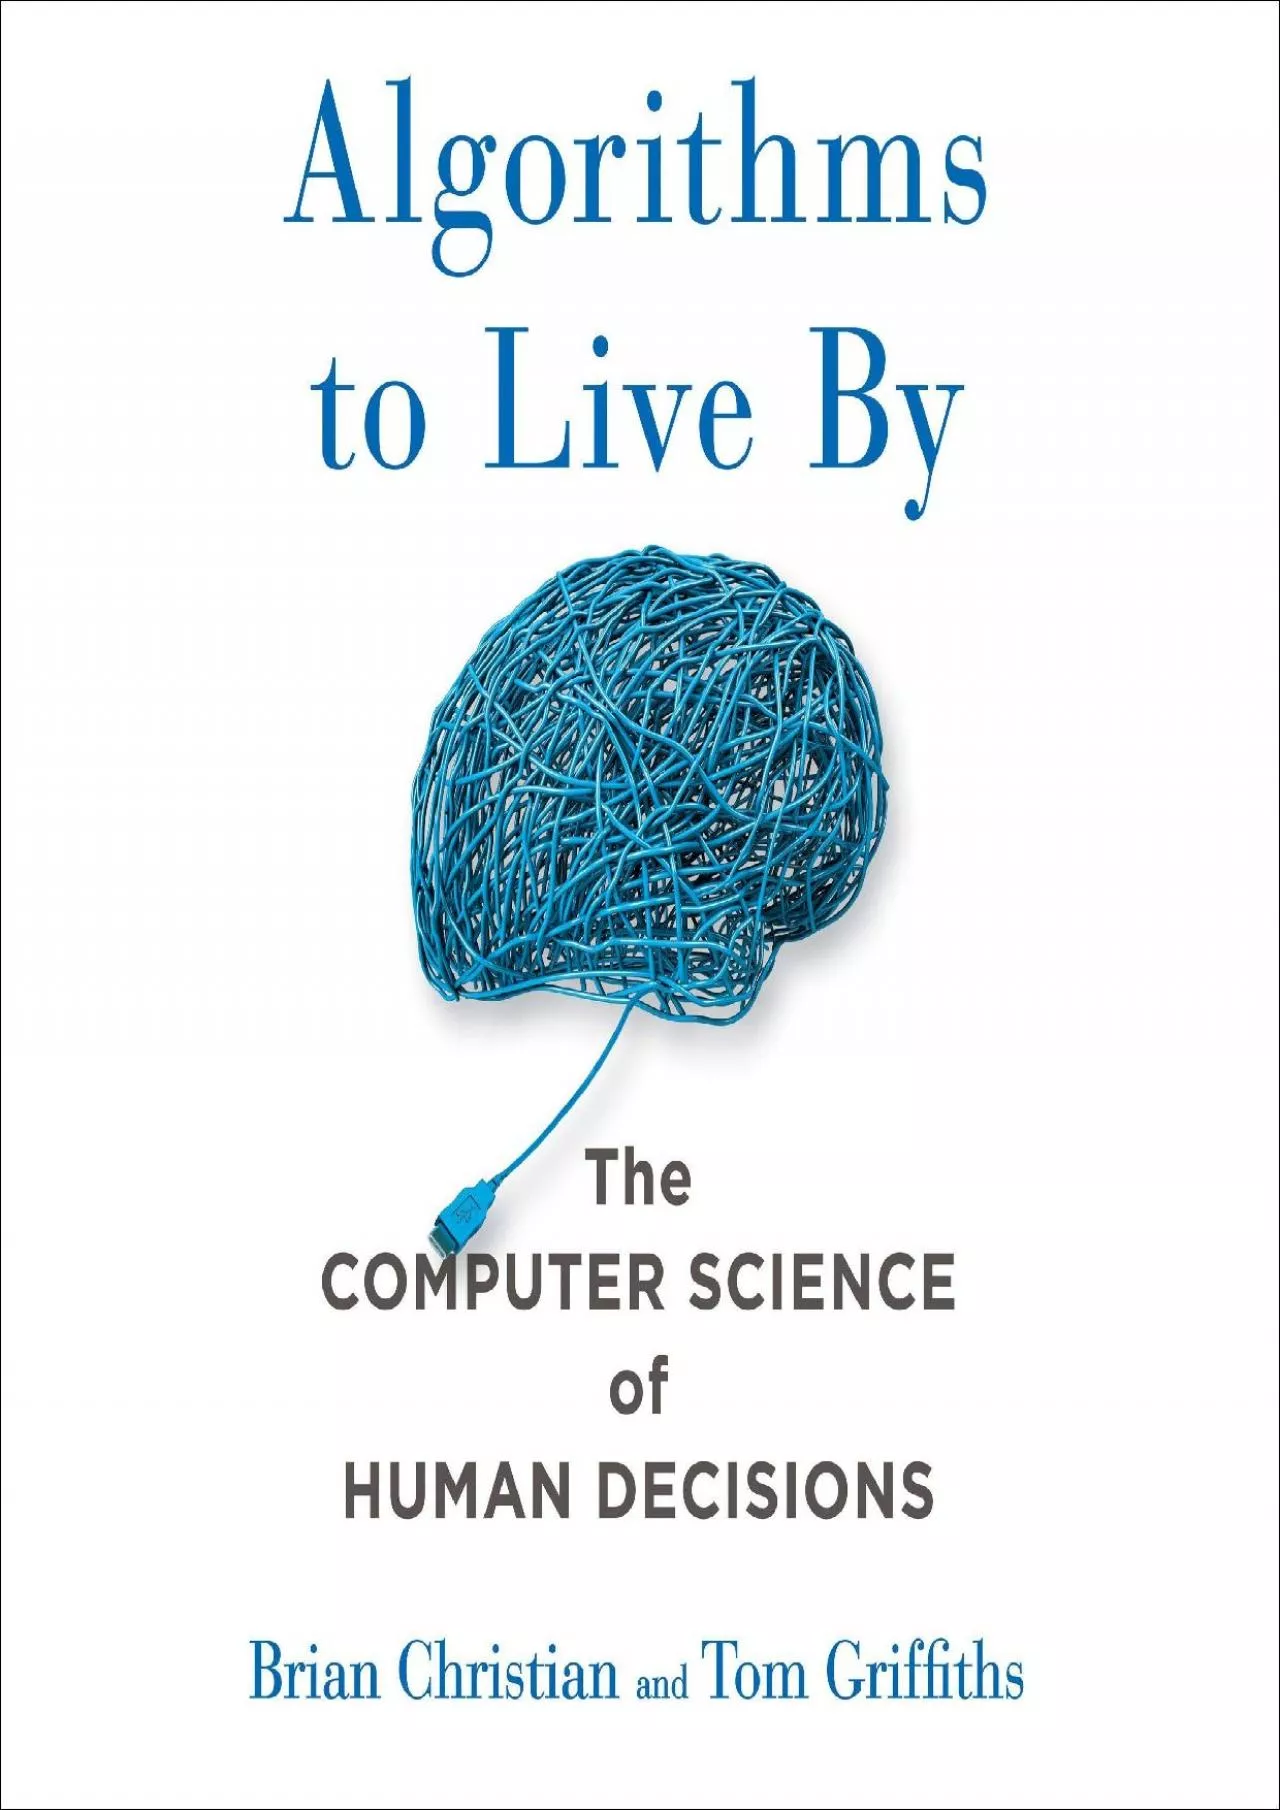 (BOOK)-Algorithms to Live By: The Computer Science of Human Decisions